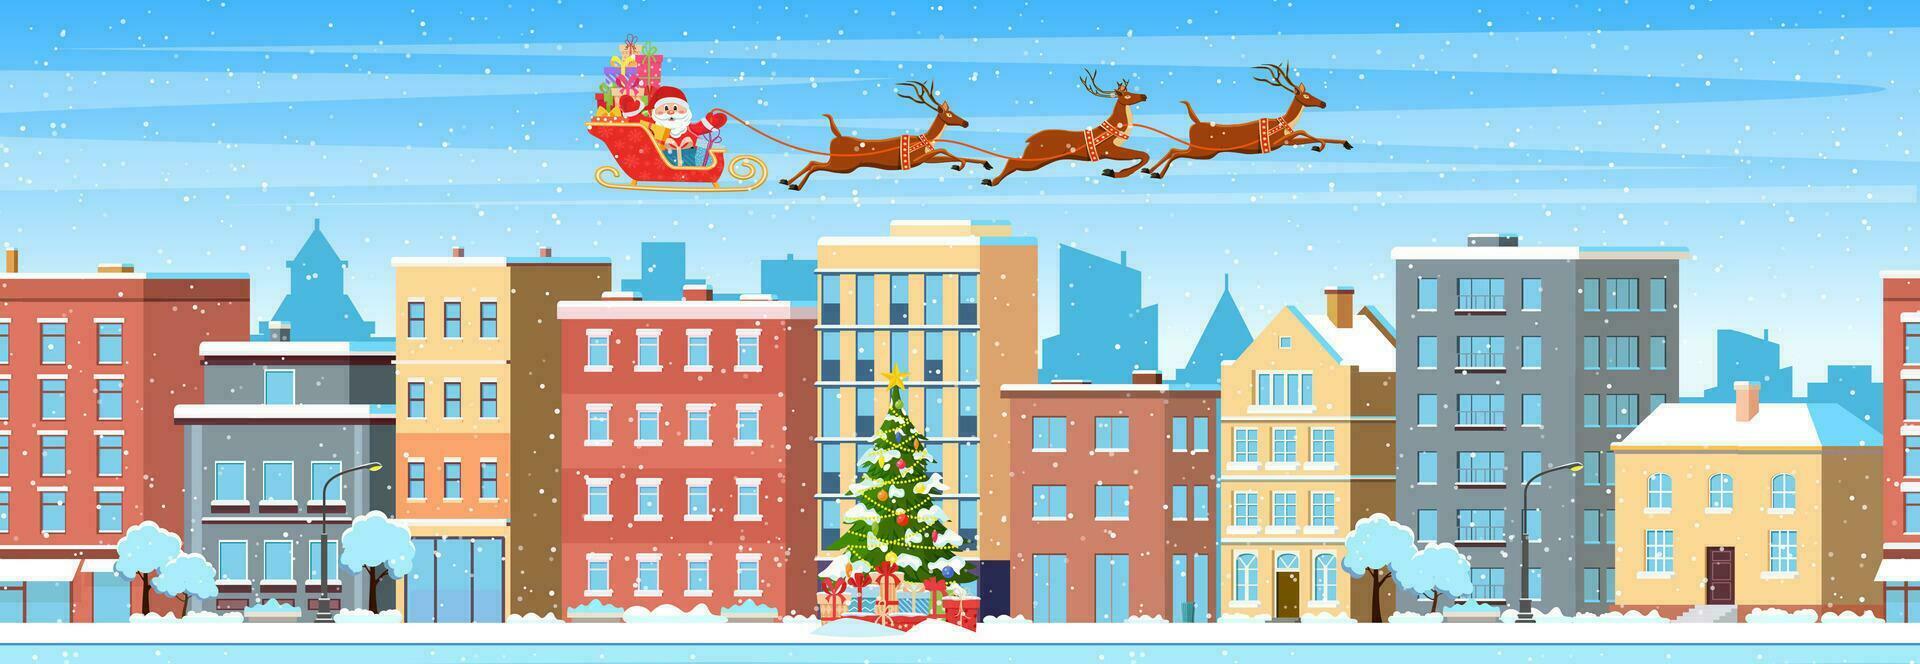 happy new year and merry Christmas winter town street. christmas town city panorama.Santa Claus with deers in sky above the city. Vector illustration in flat style